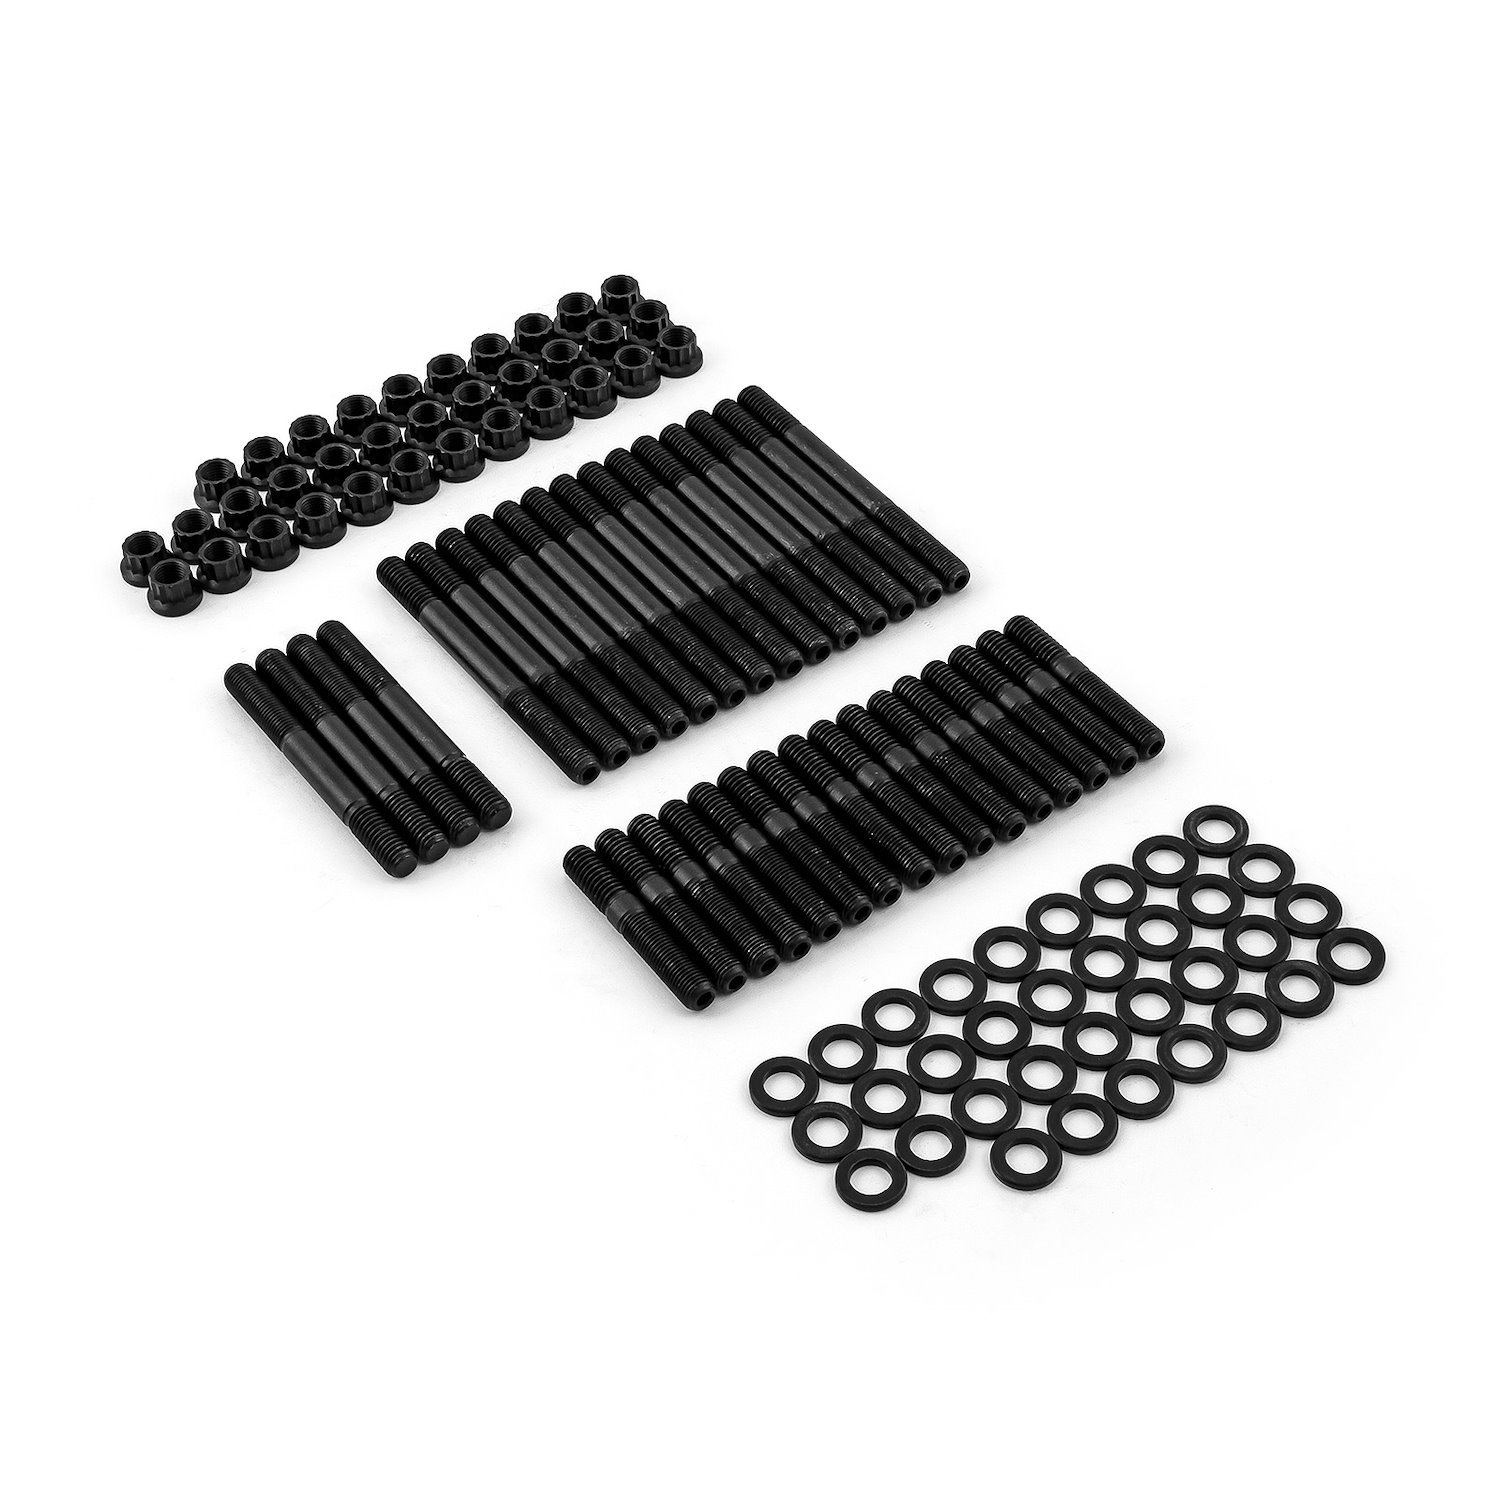 PCE279.1001 Head Stud Kit for 1955-2000 Chevy Small Block 262-400 ci V8